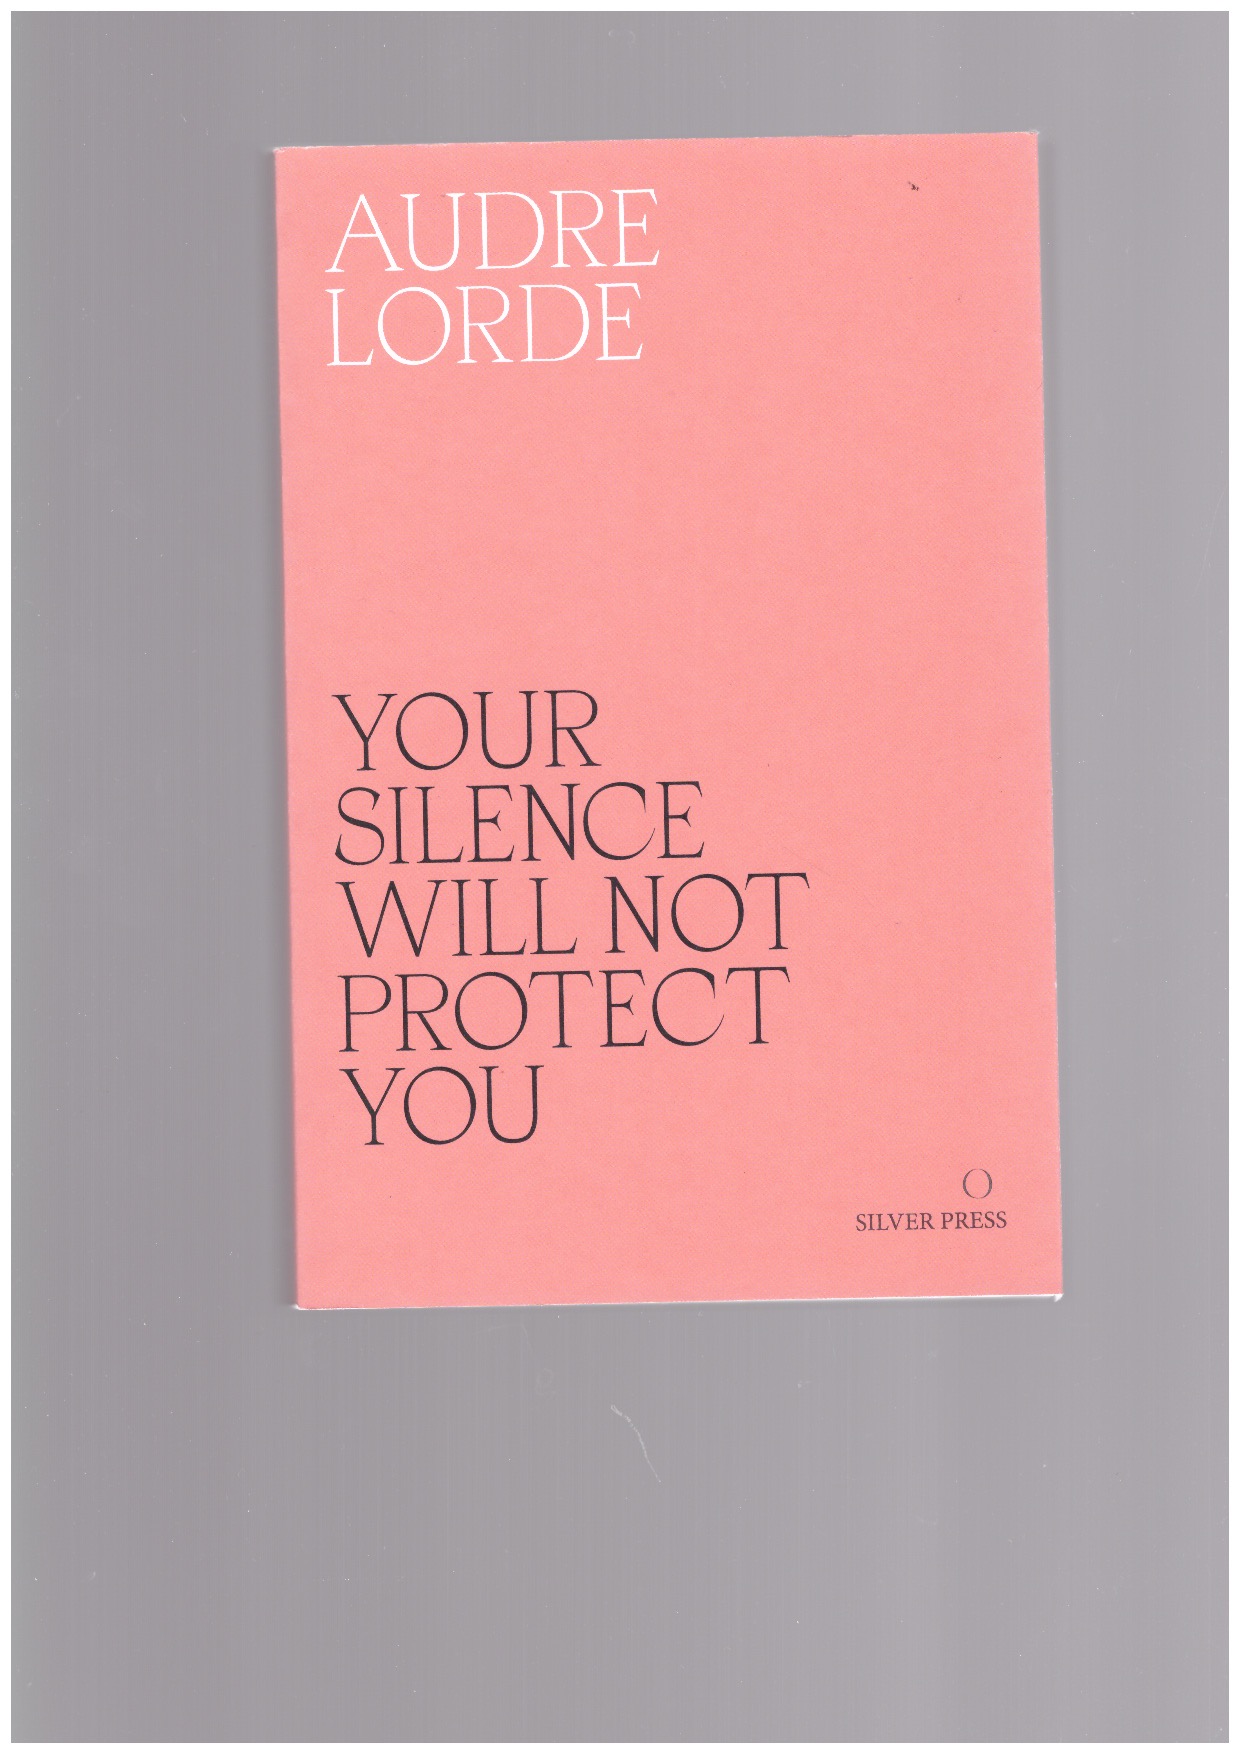 LORDE, Audre - Your Silence Will Not Protect You